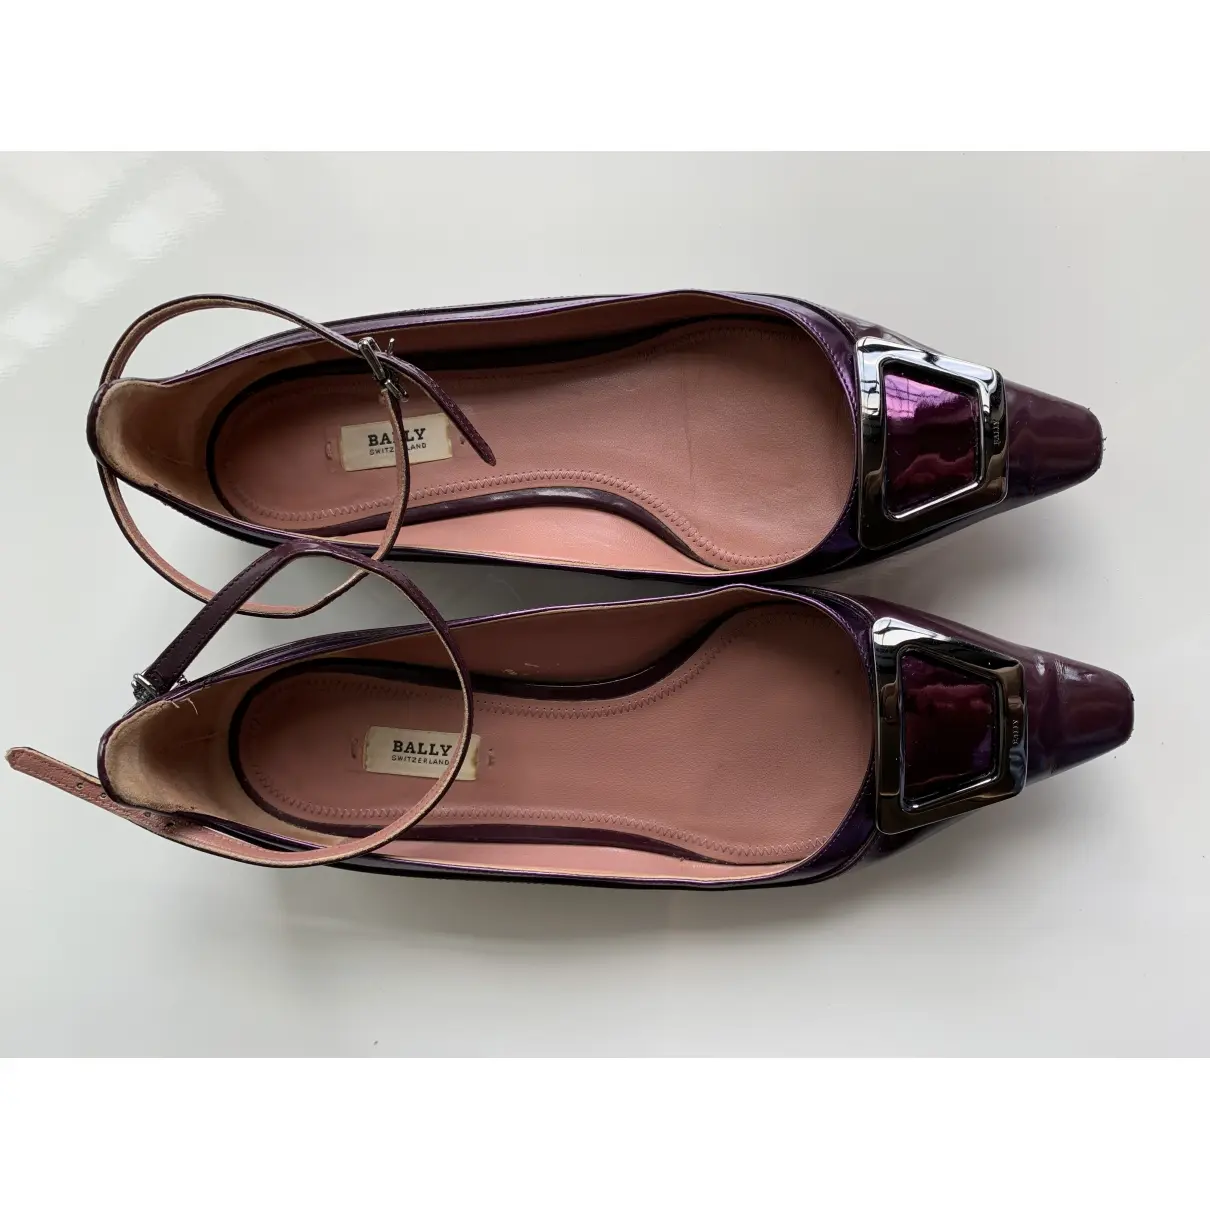 Bally Patent leather ballet flats for sale